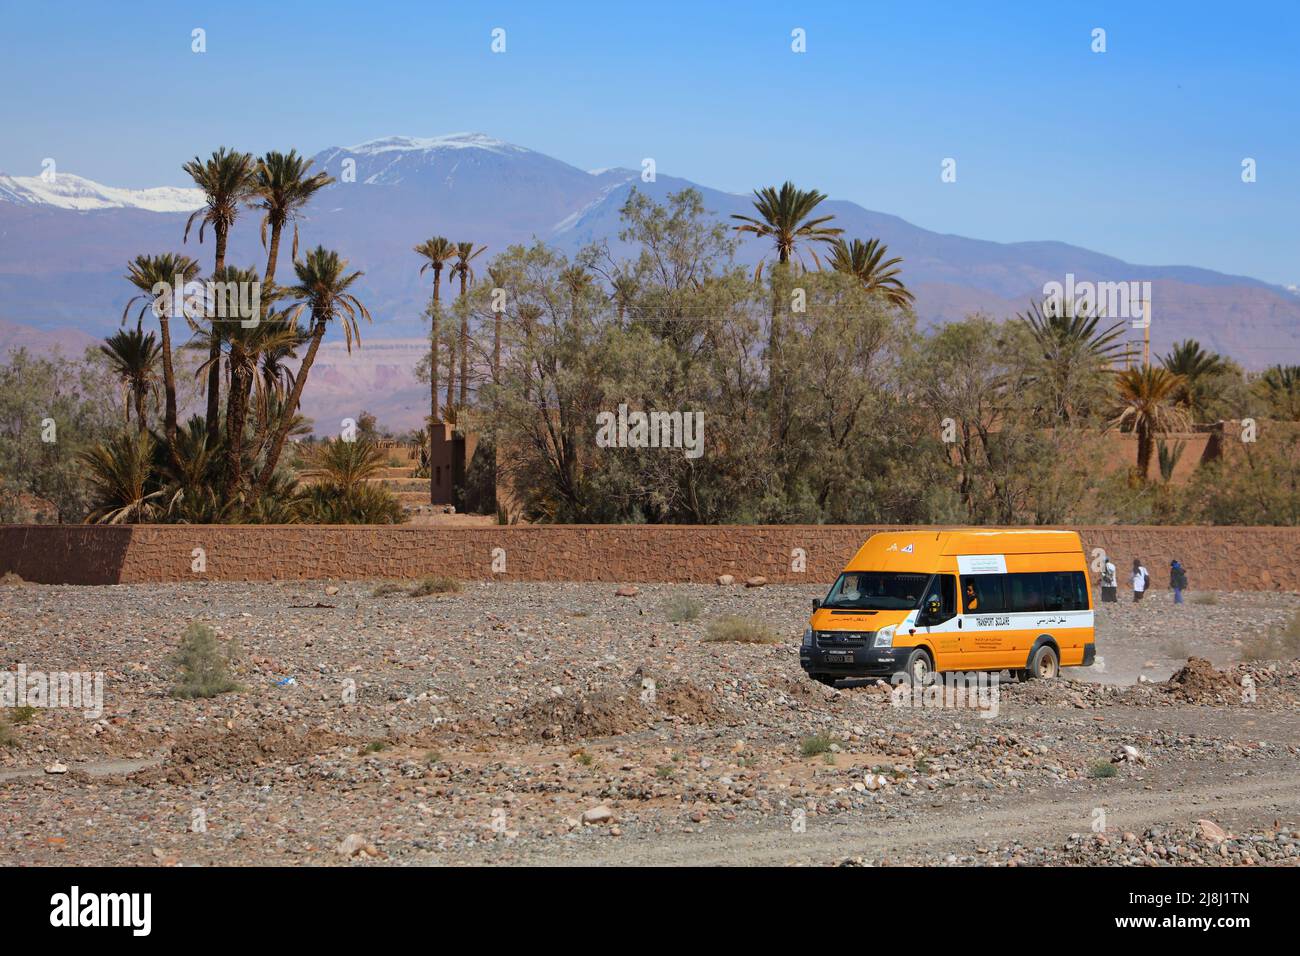 OUARZAZATE, MOROCCO - FEBRUARY 18, 2022: Yellow school bus navigates dirt road in rural Morocco with Atlas mountains in background. It was funded by N Stock Photo